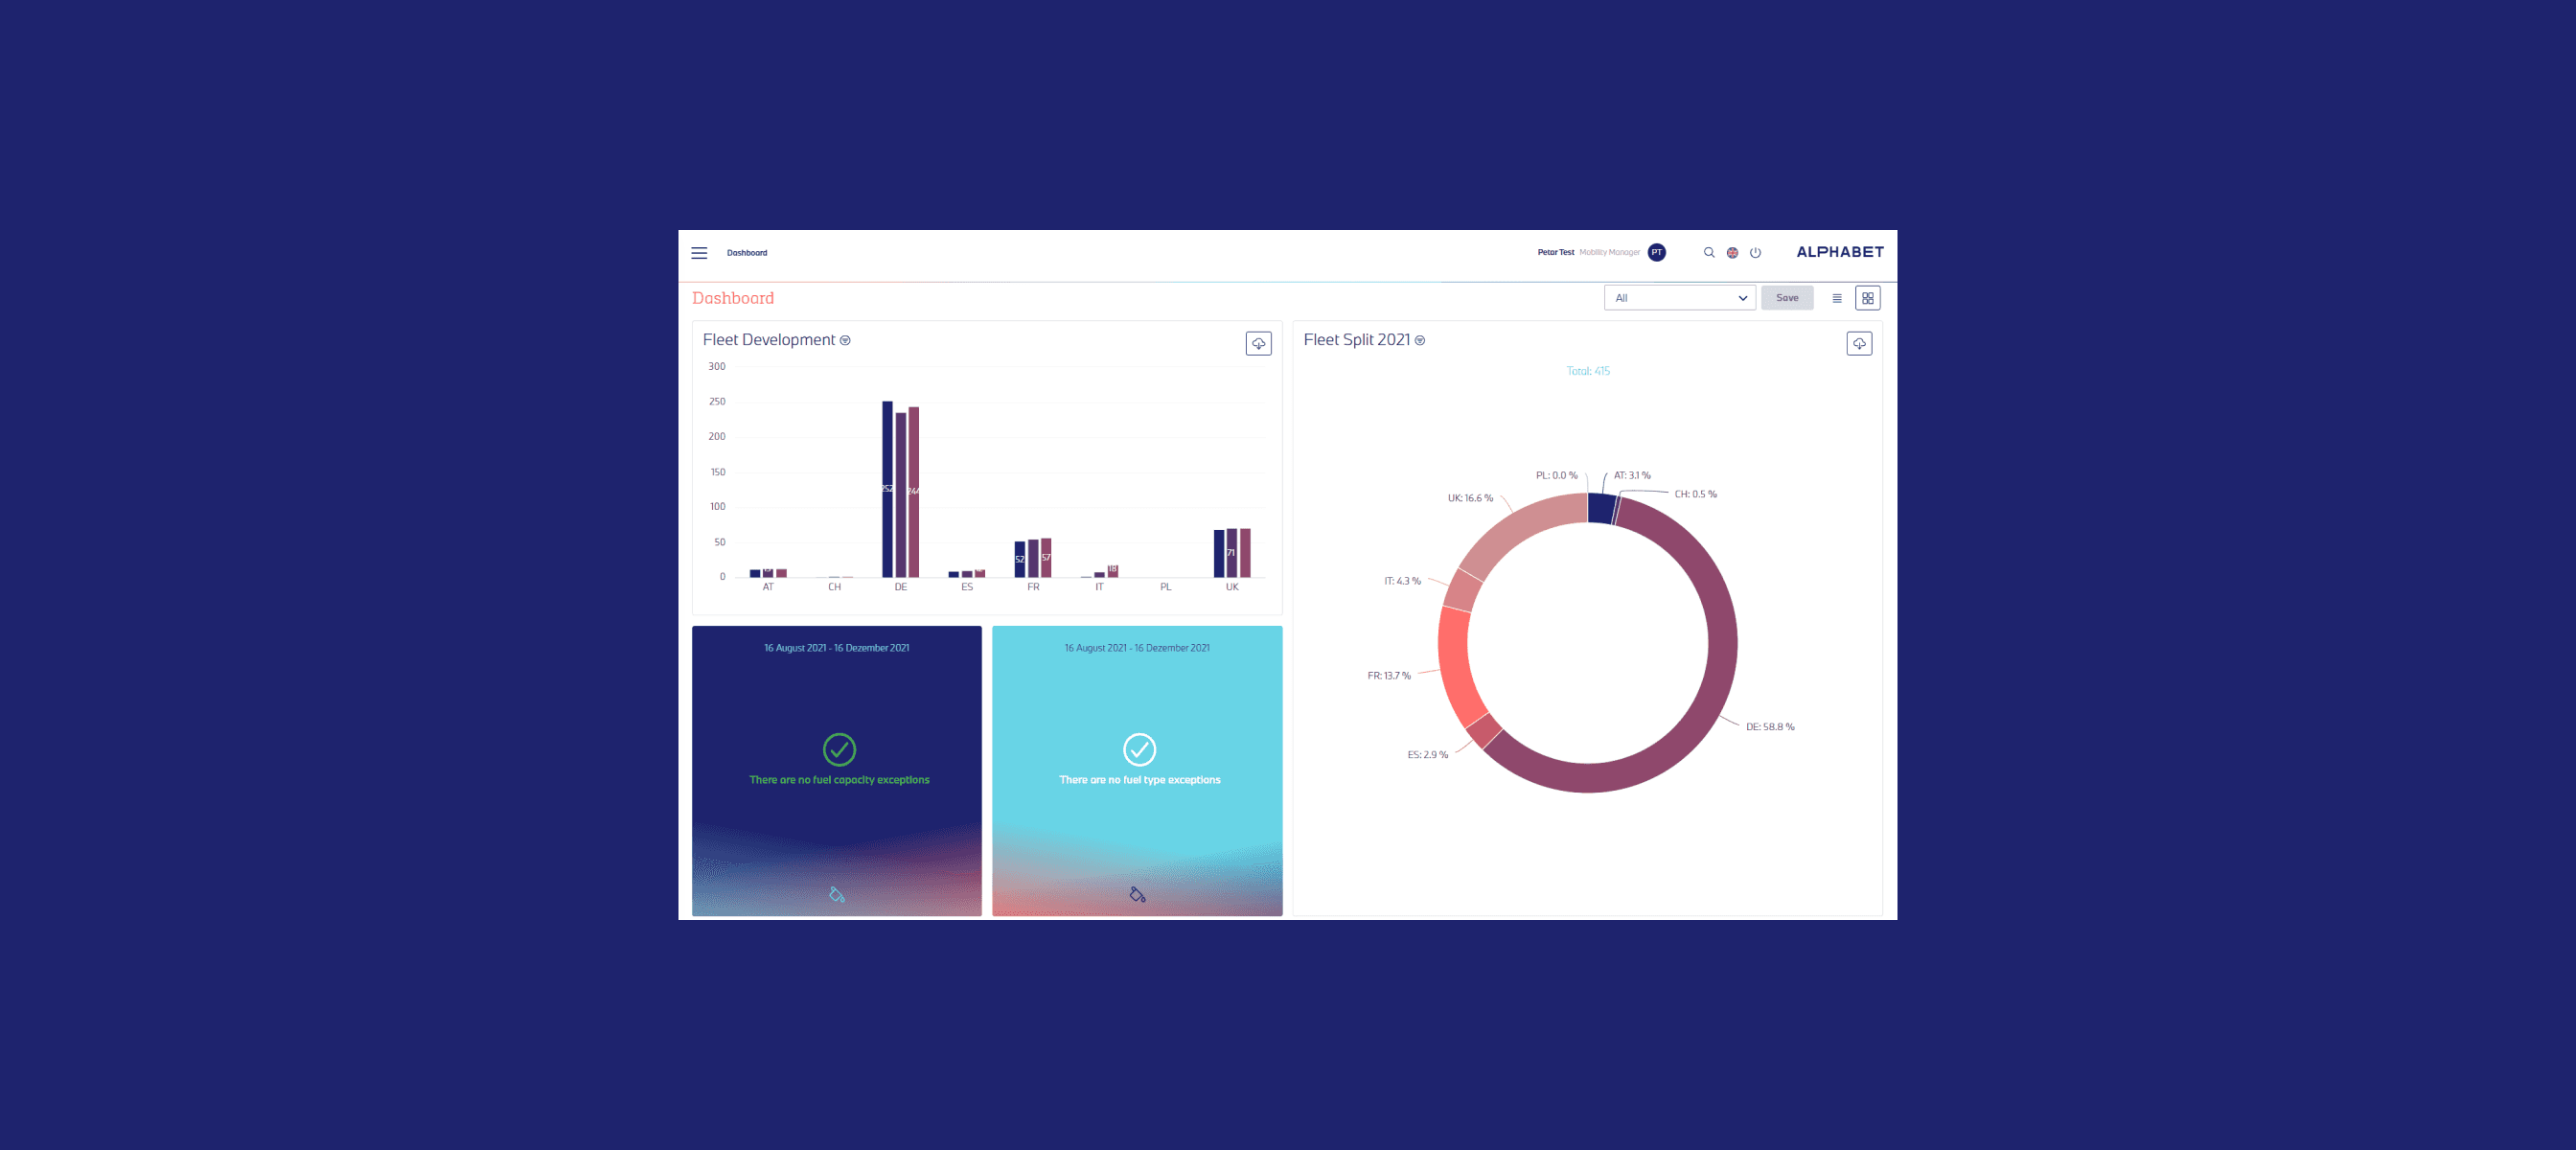 fleet-reporting-improved-dashboard-interface